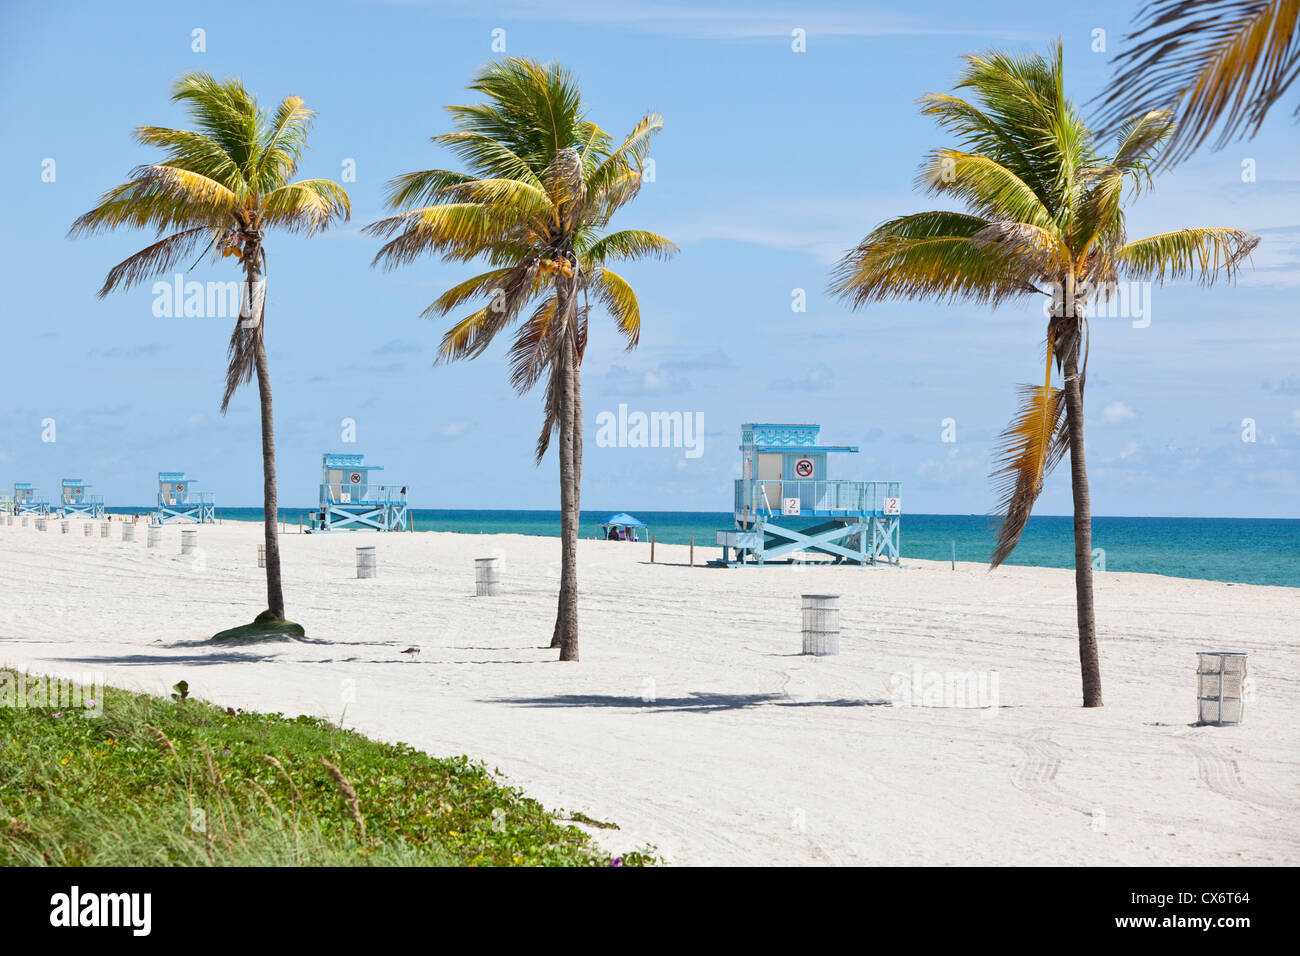 Row of lifeguard towers and palm trees on Haulover Beach, Miami-Dade County, Florida, USA. Stock Photo